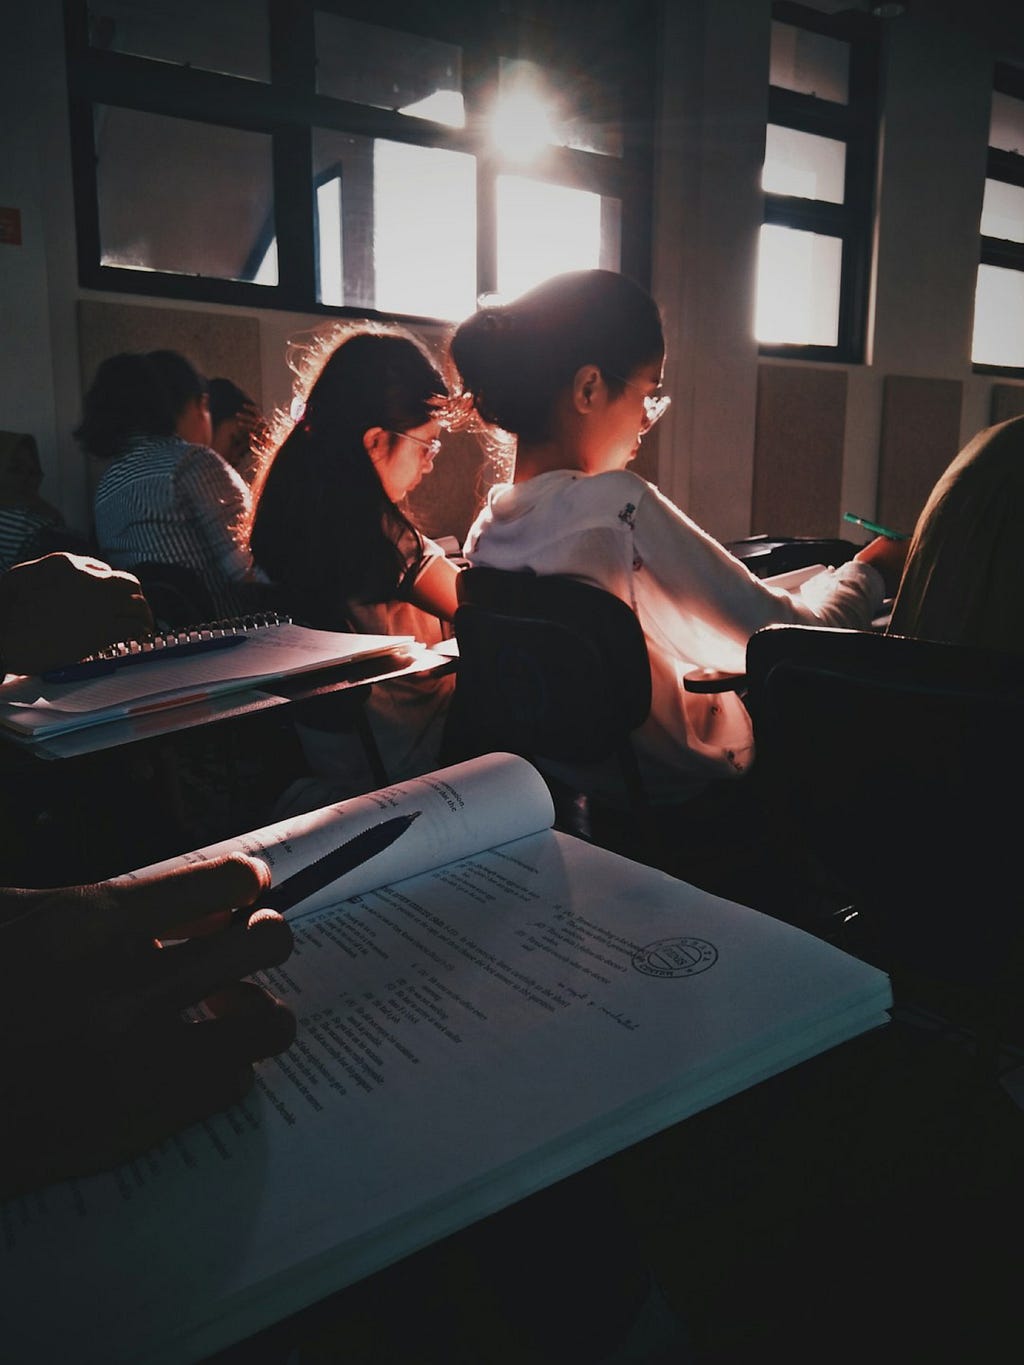 Students sitting at desks writing in books